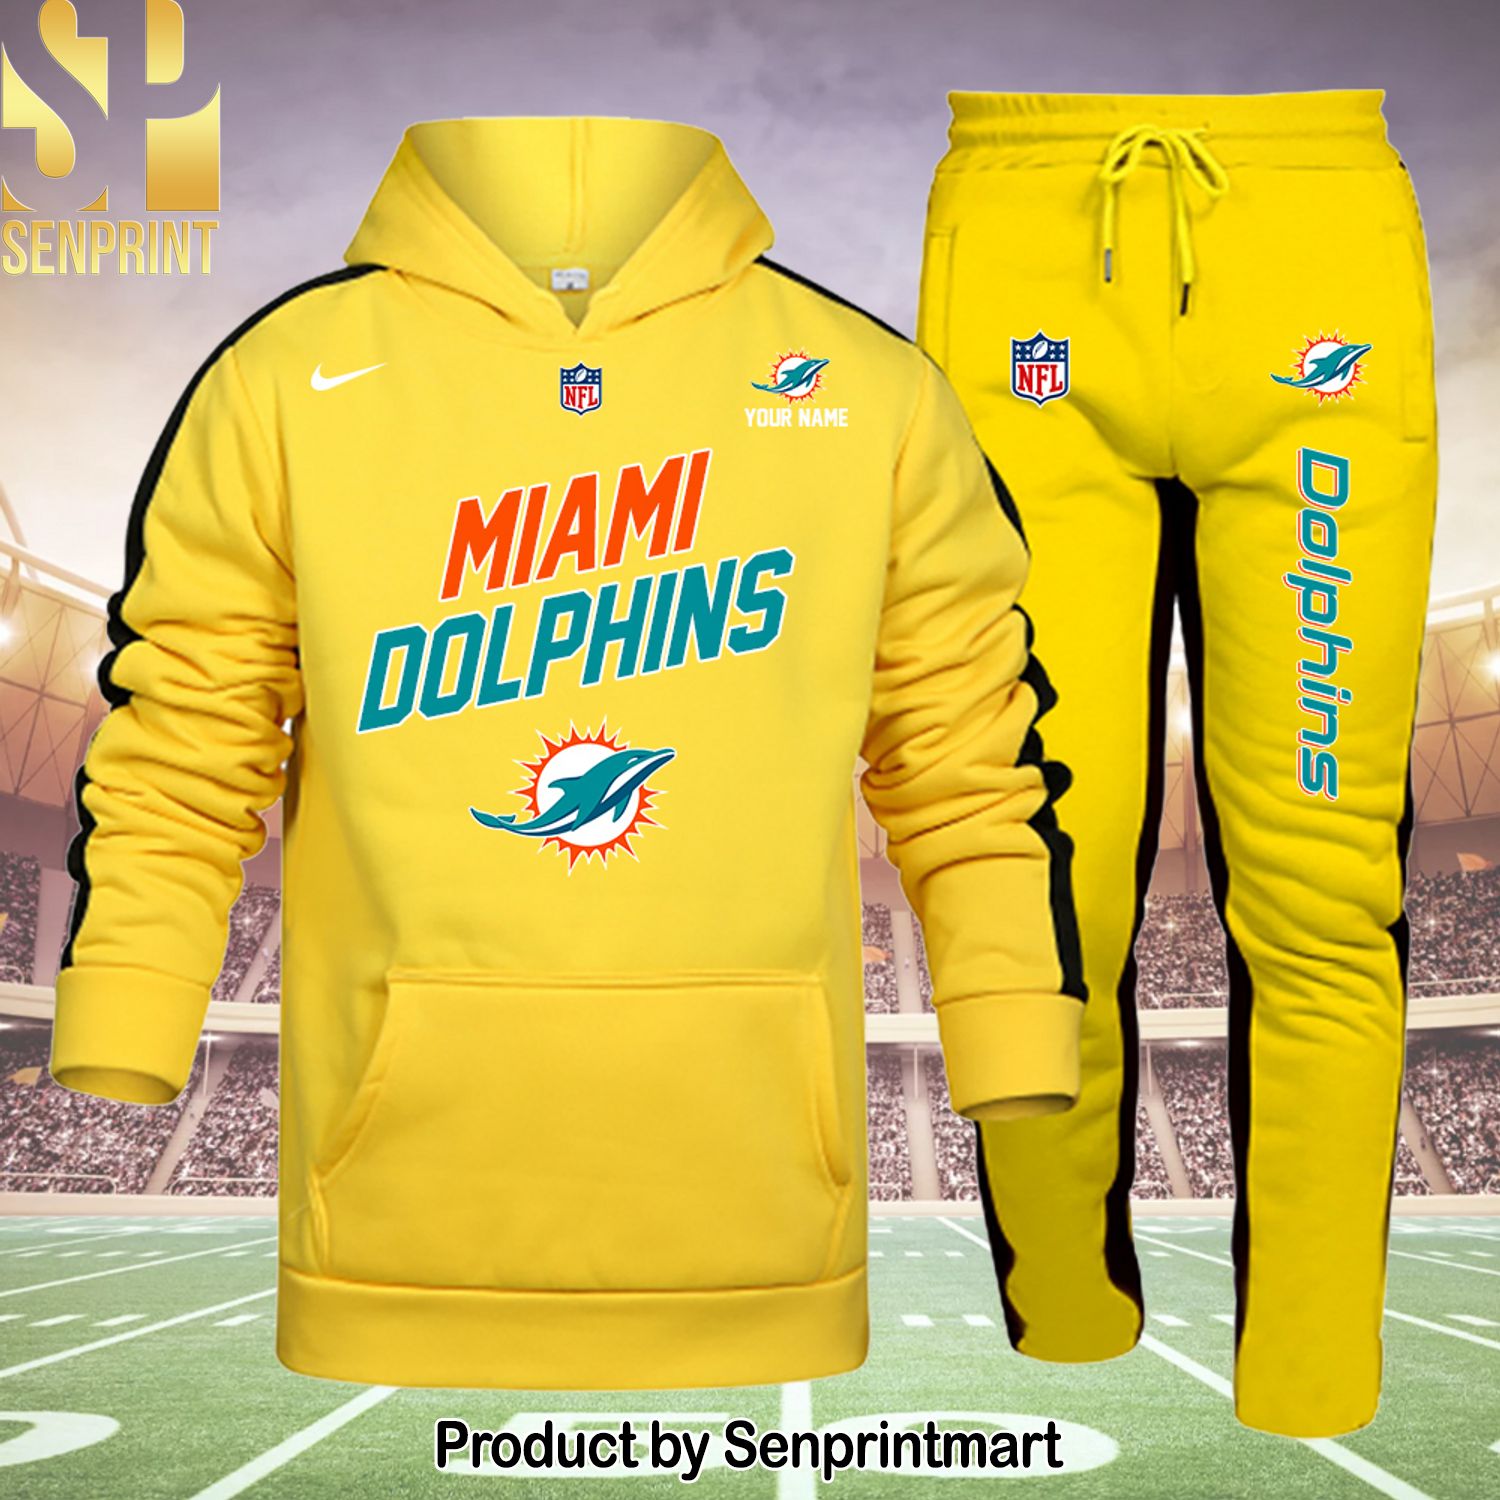 Miami Dolphins Classic Shirt and Pants